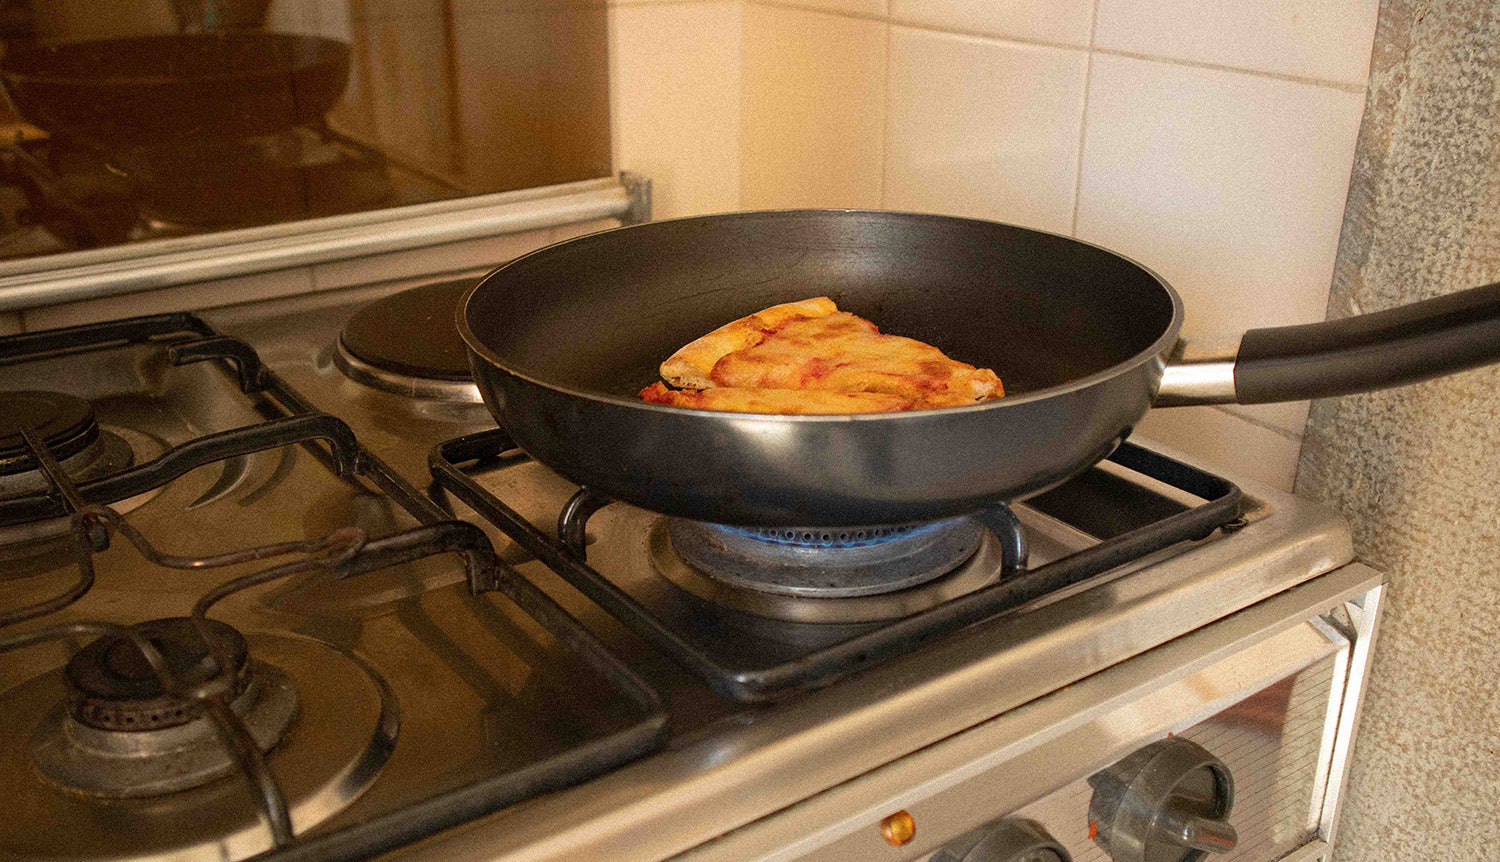 Hot tip for reheating pizzas at home